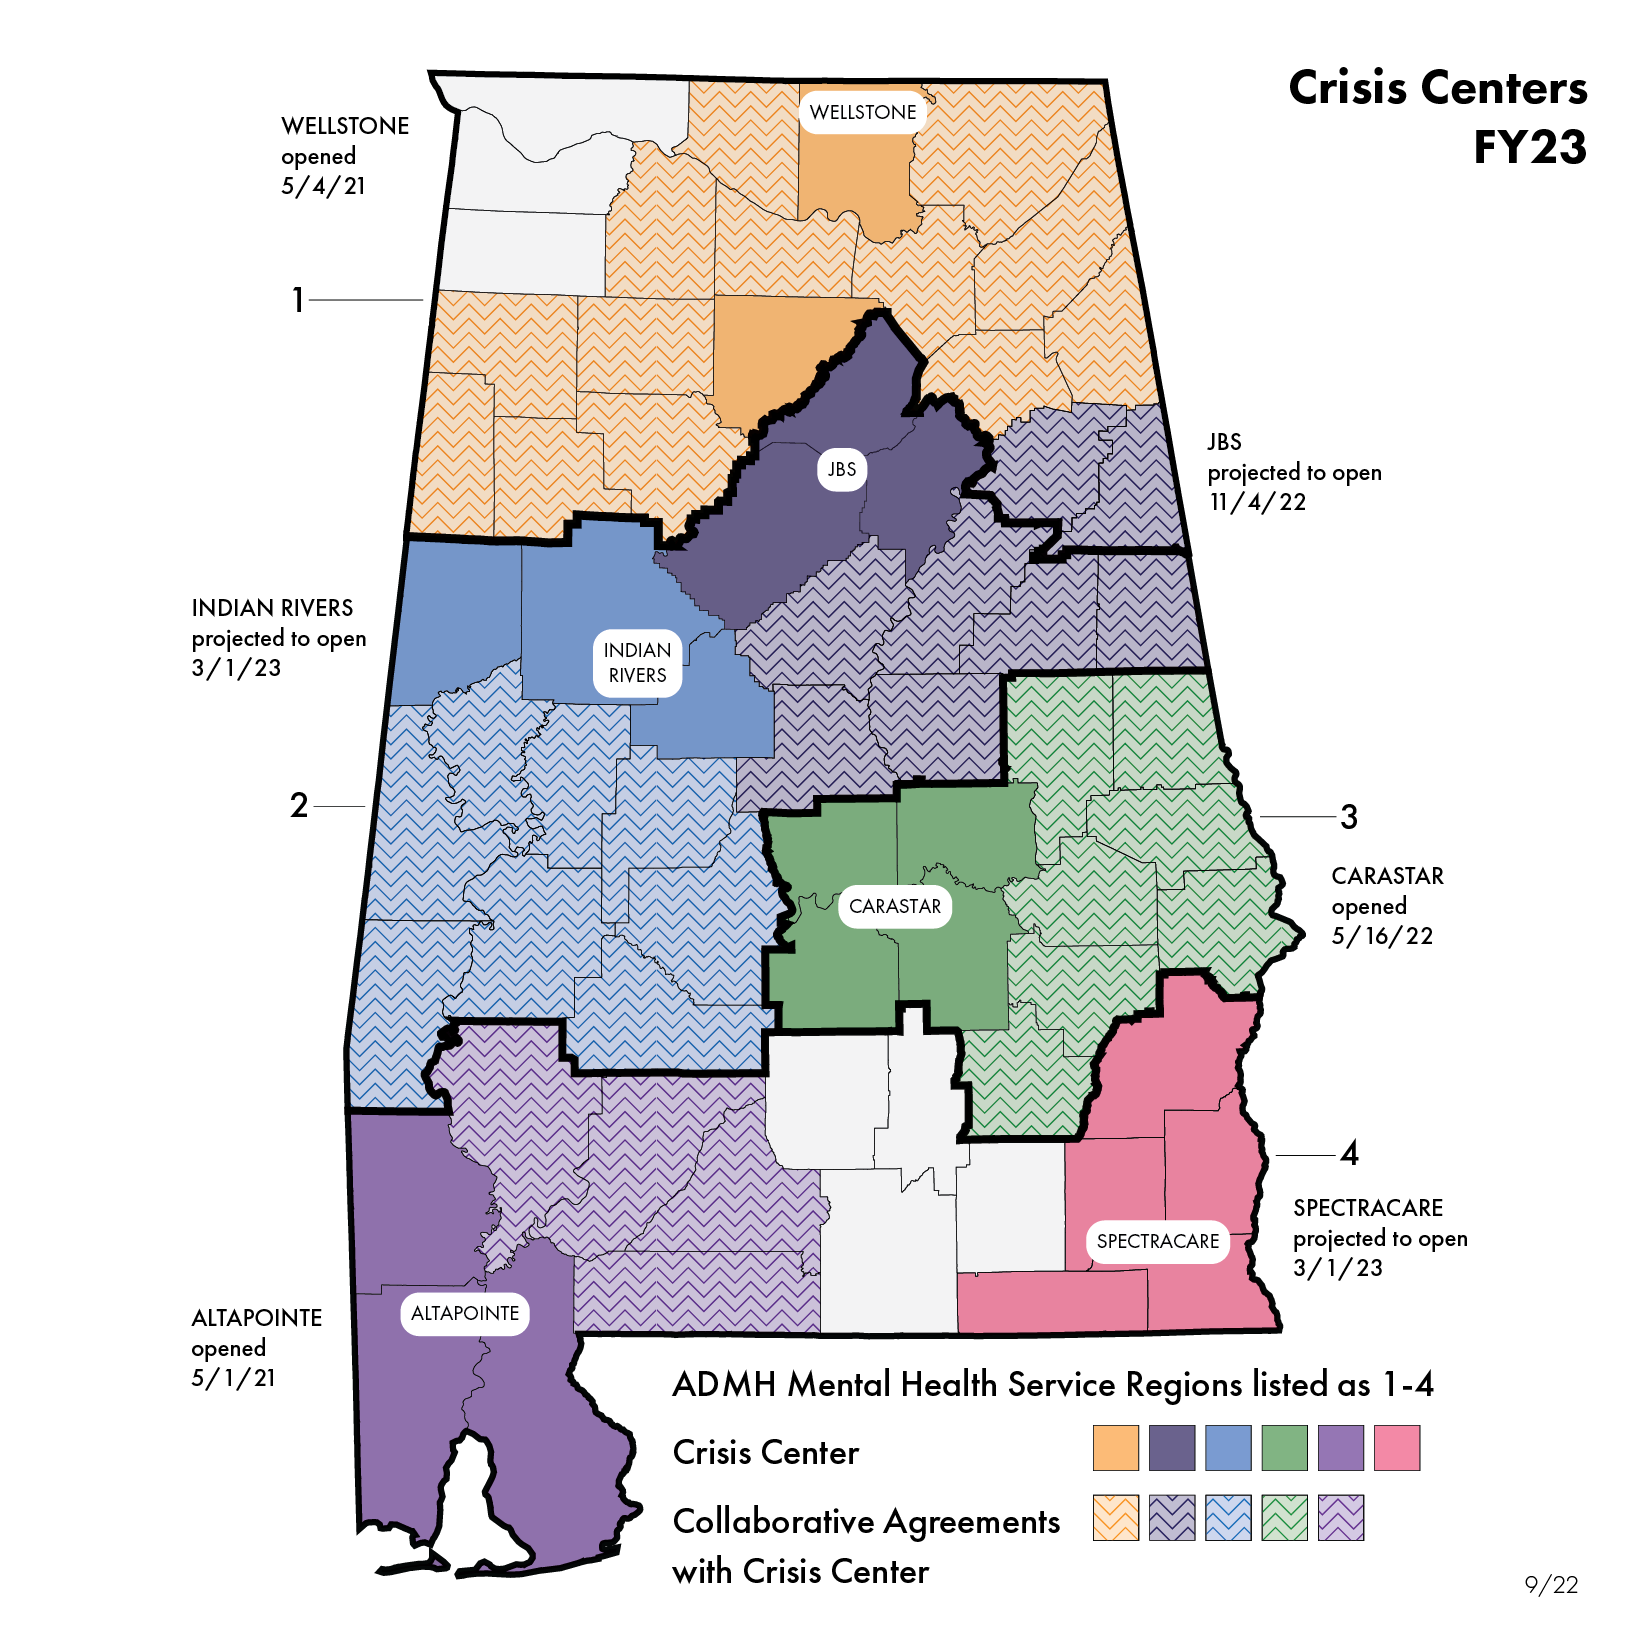 Map of Alabama showing the all counties being covered by future six Crisis Centers except for Butler, Coffee, Colbert, Covington, Crenshaw, Franklin, and Lauderdale.